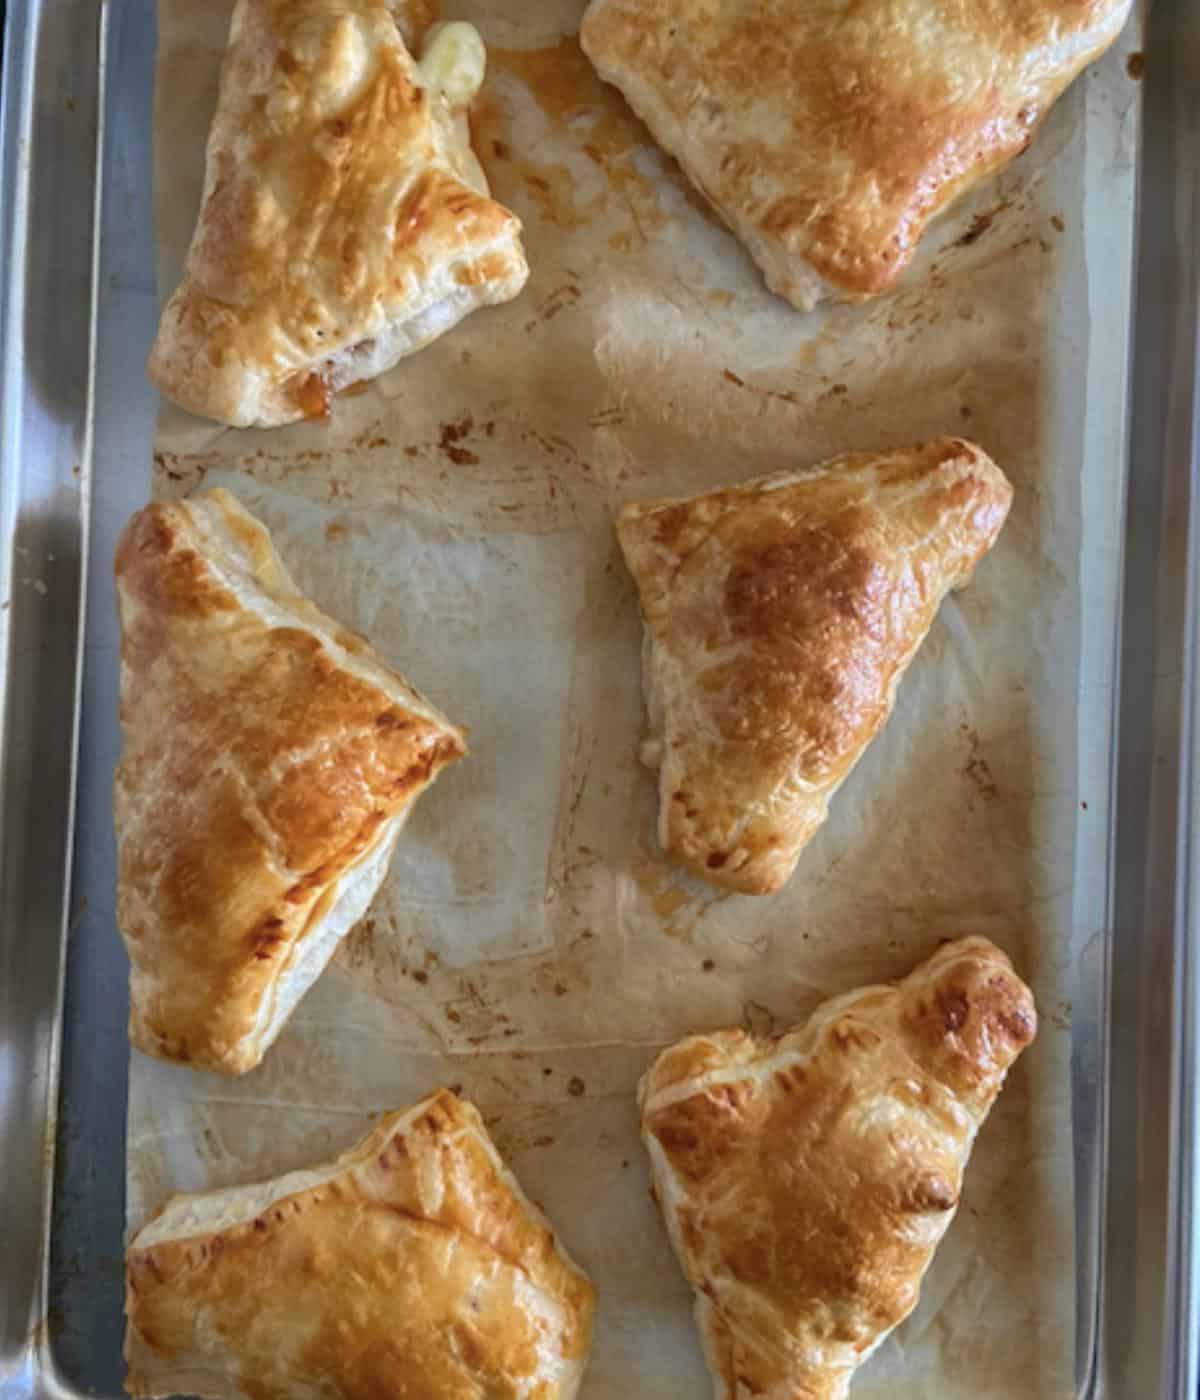 turnovers after baking on cookie sheet